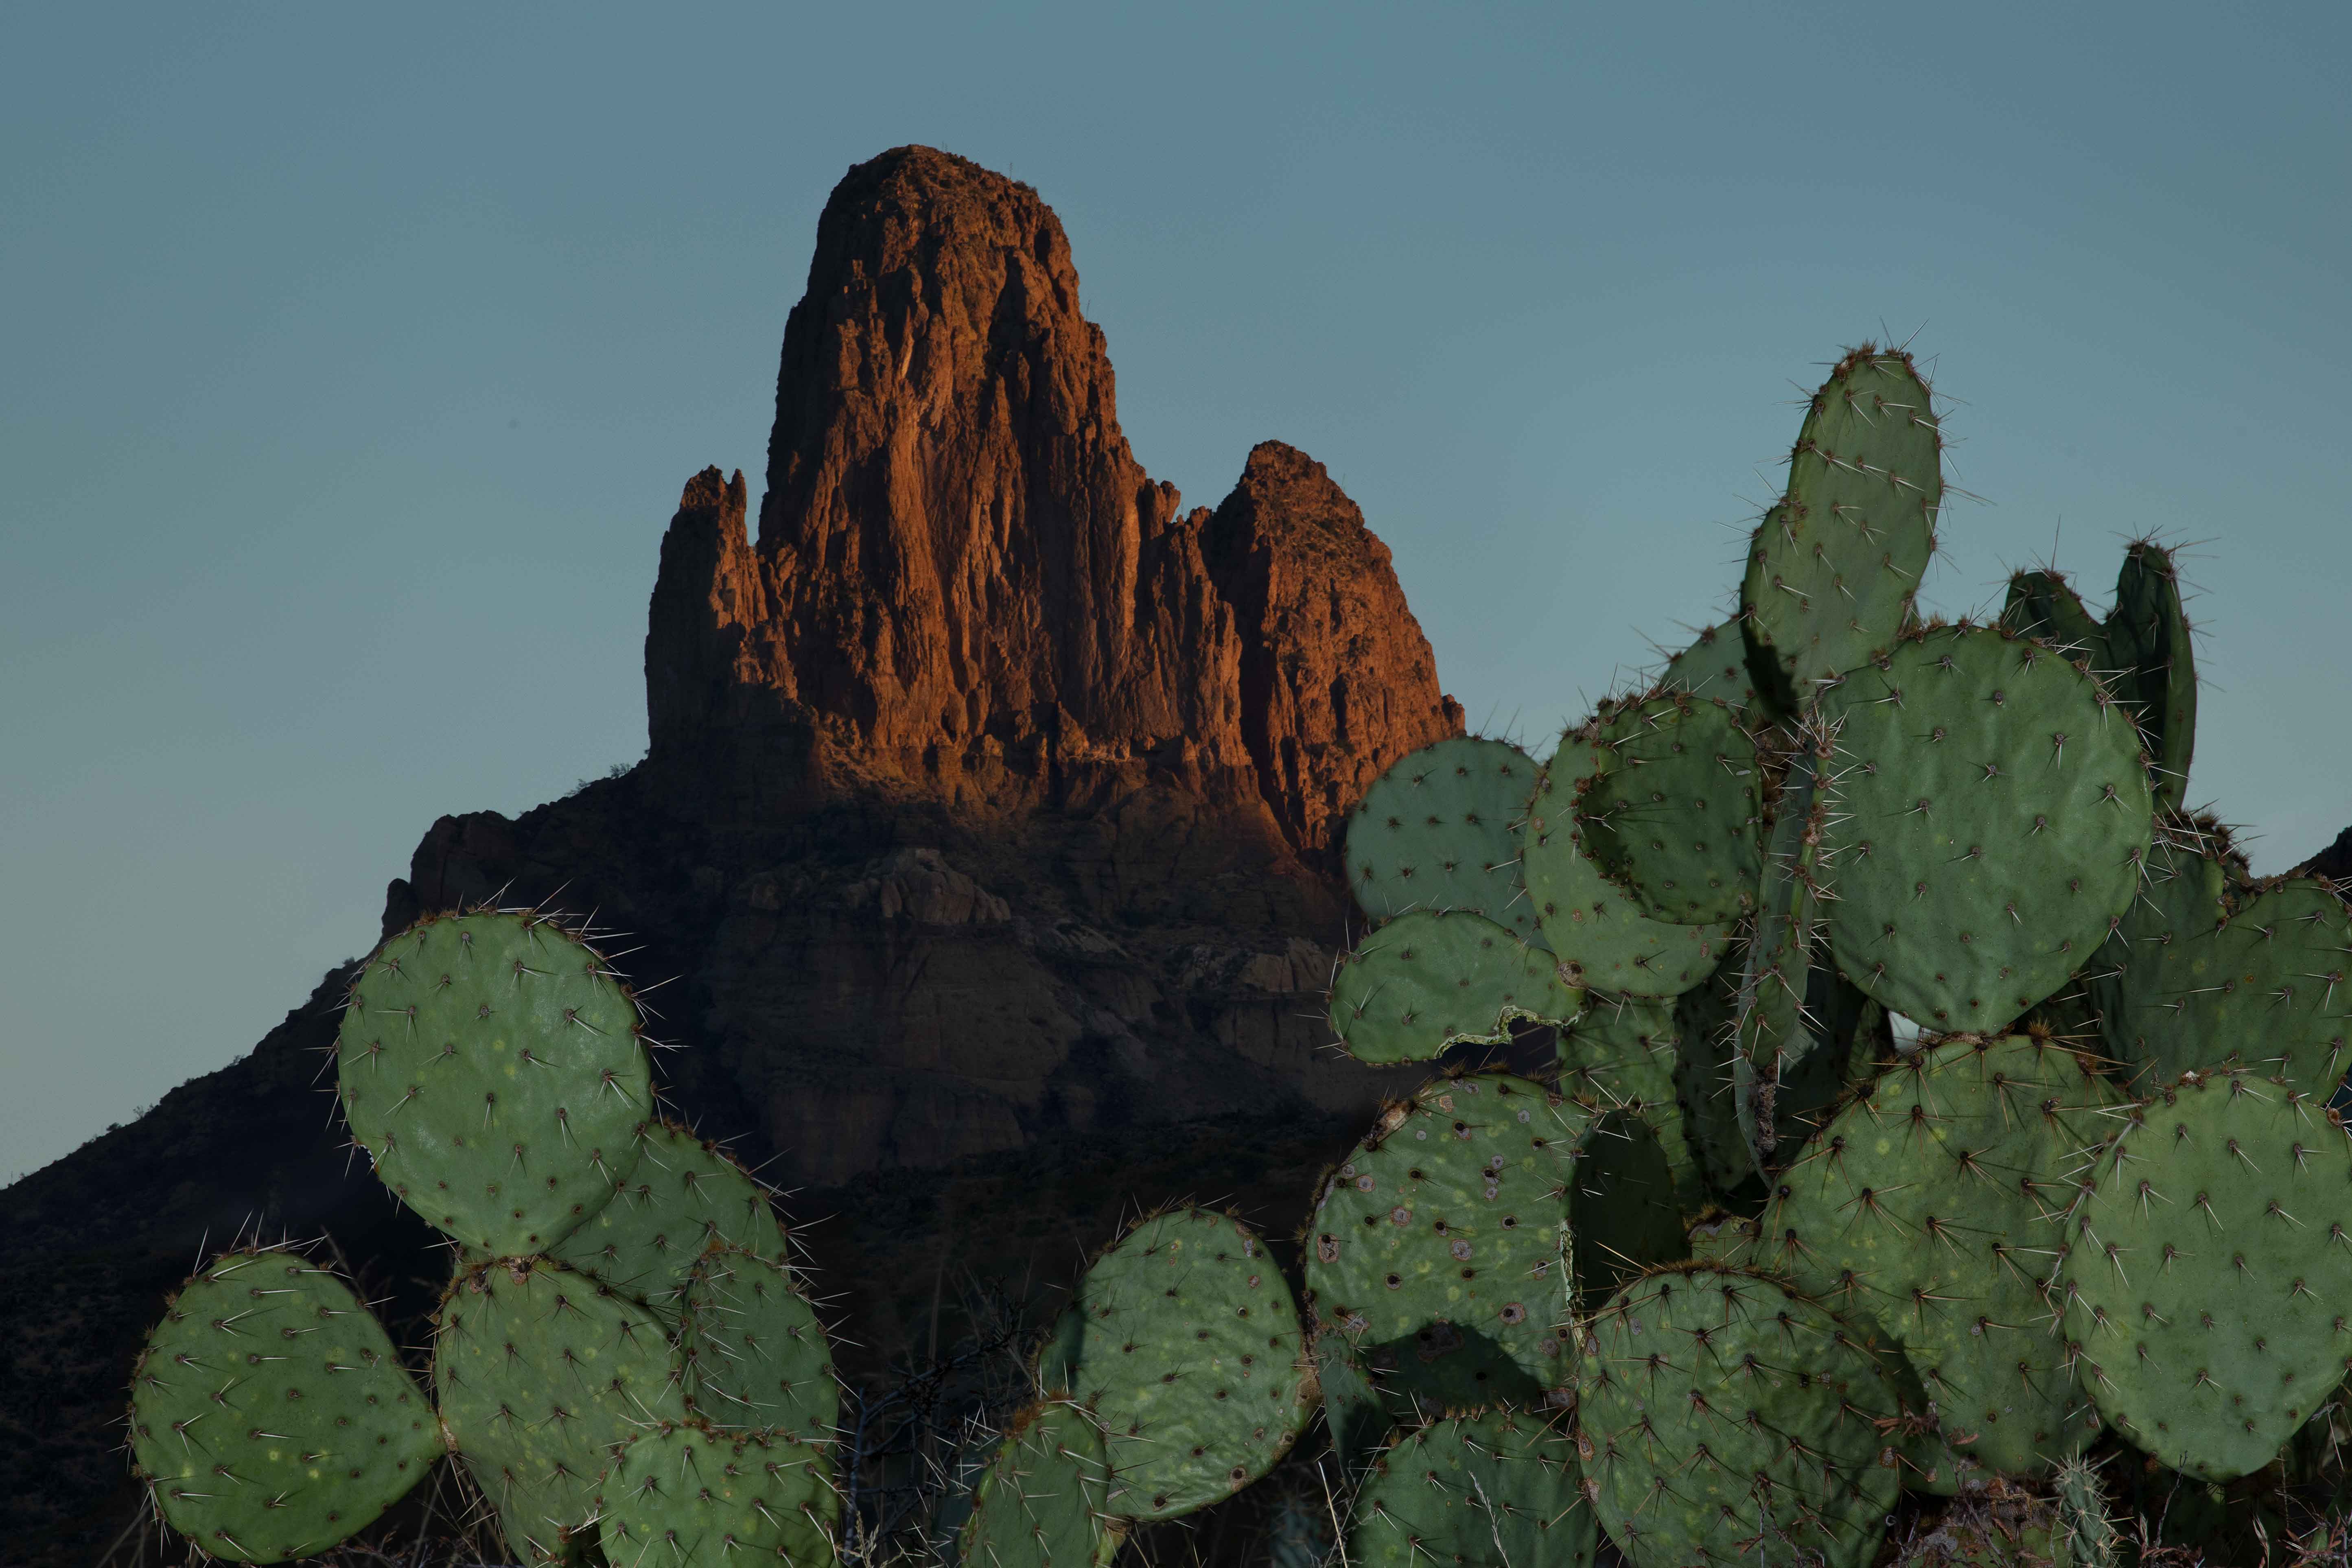 The Weaver's Needle rock formation towers over prickly pear cactus in the Superstition Mts. in the Arizona desert